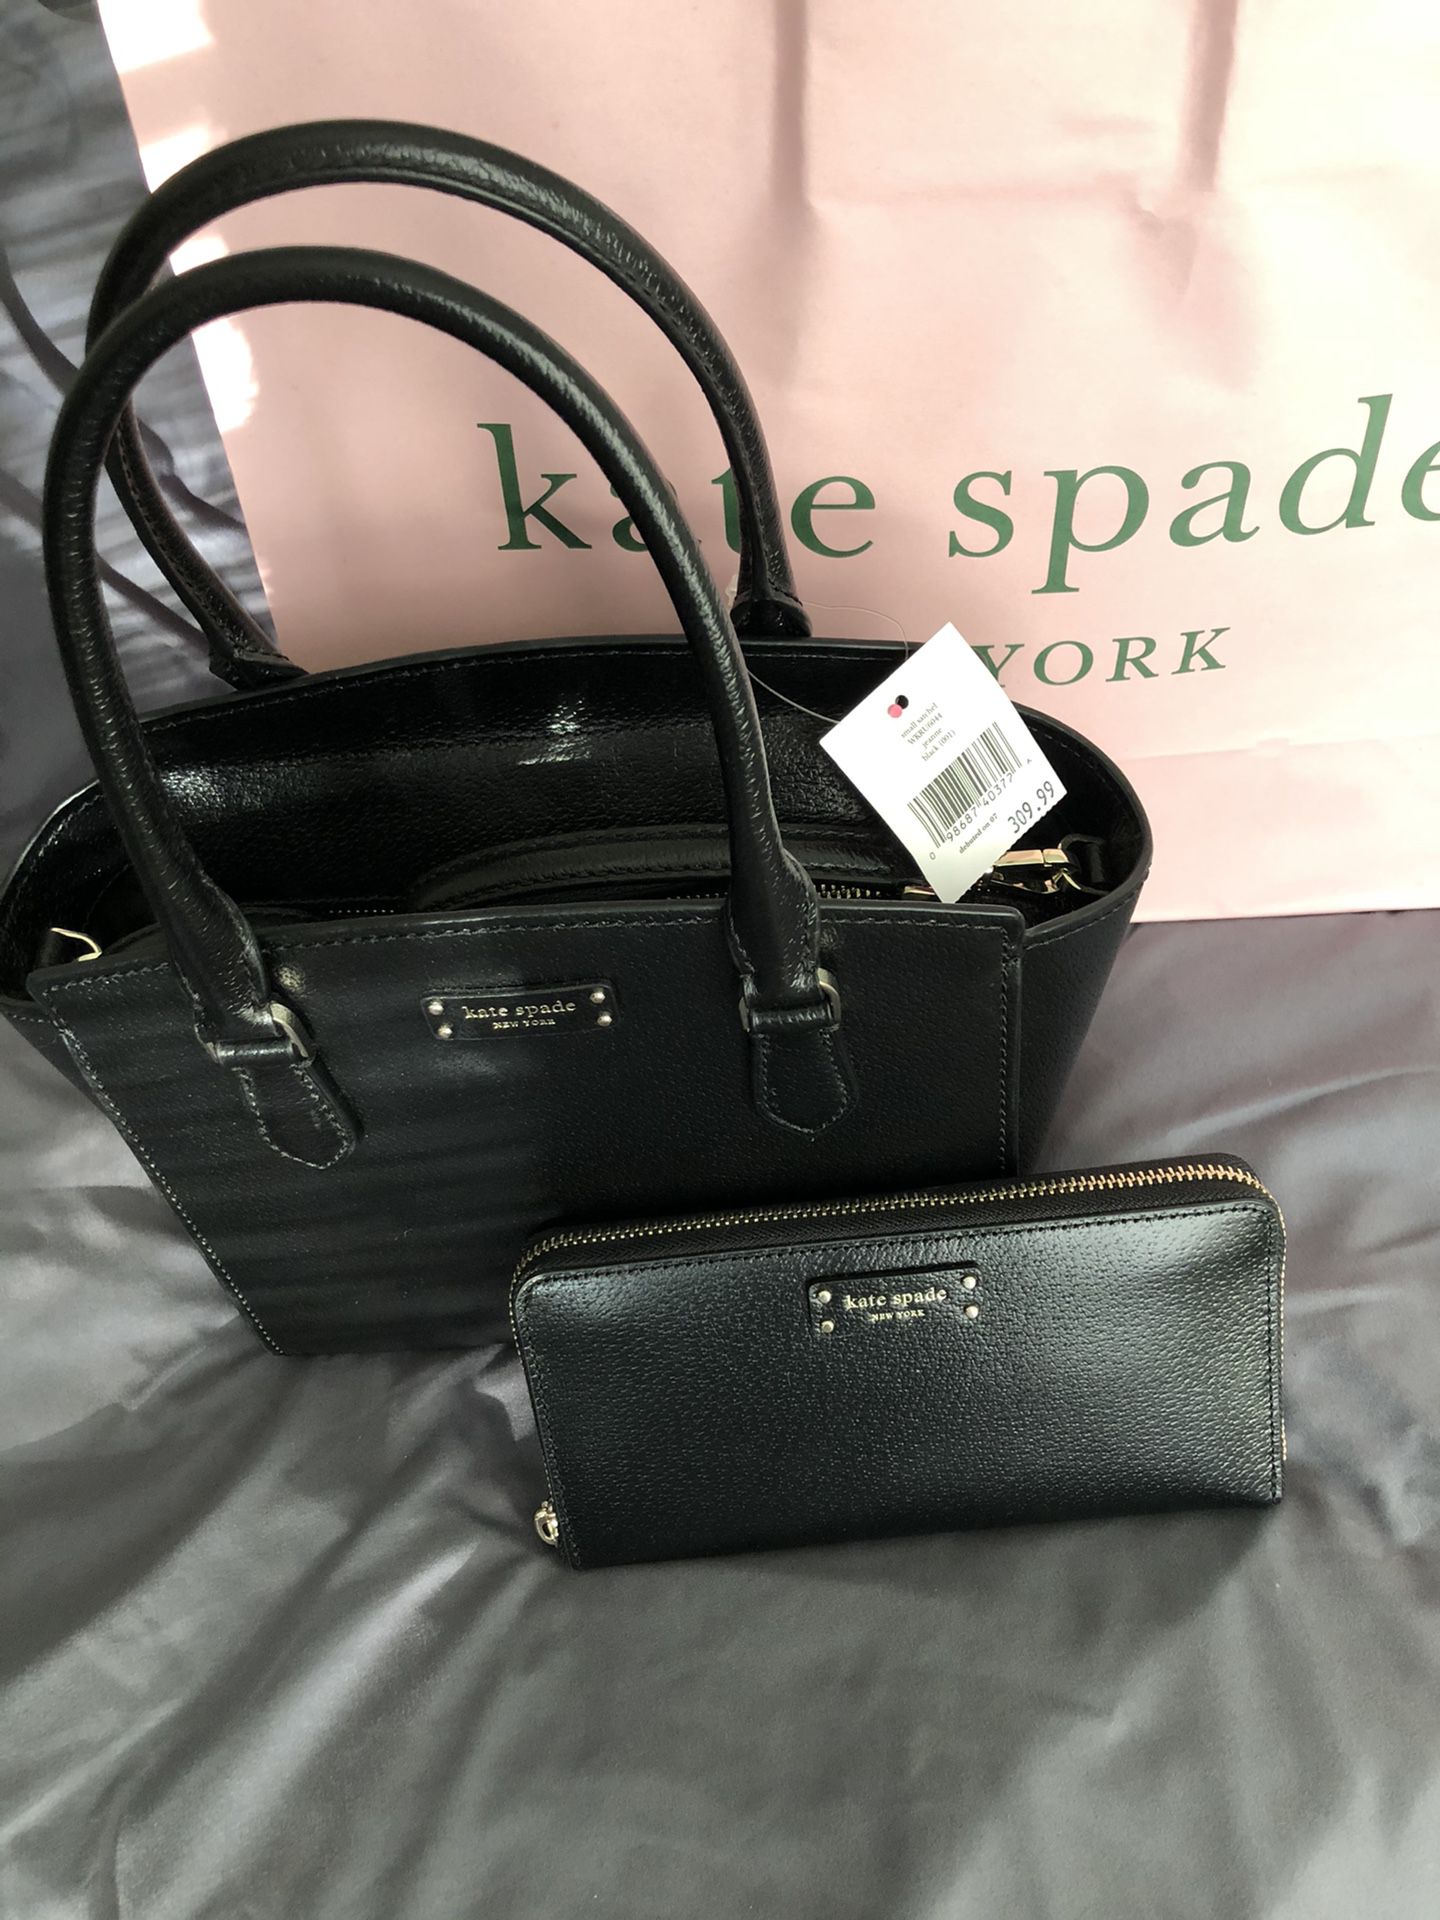 Kate Spade purse with matching wallet. Brand new never used. Still have tags and receipt. $479 value. Willing to trade for Apple products or ?